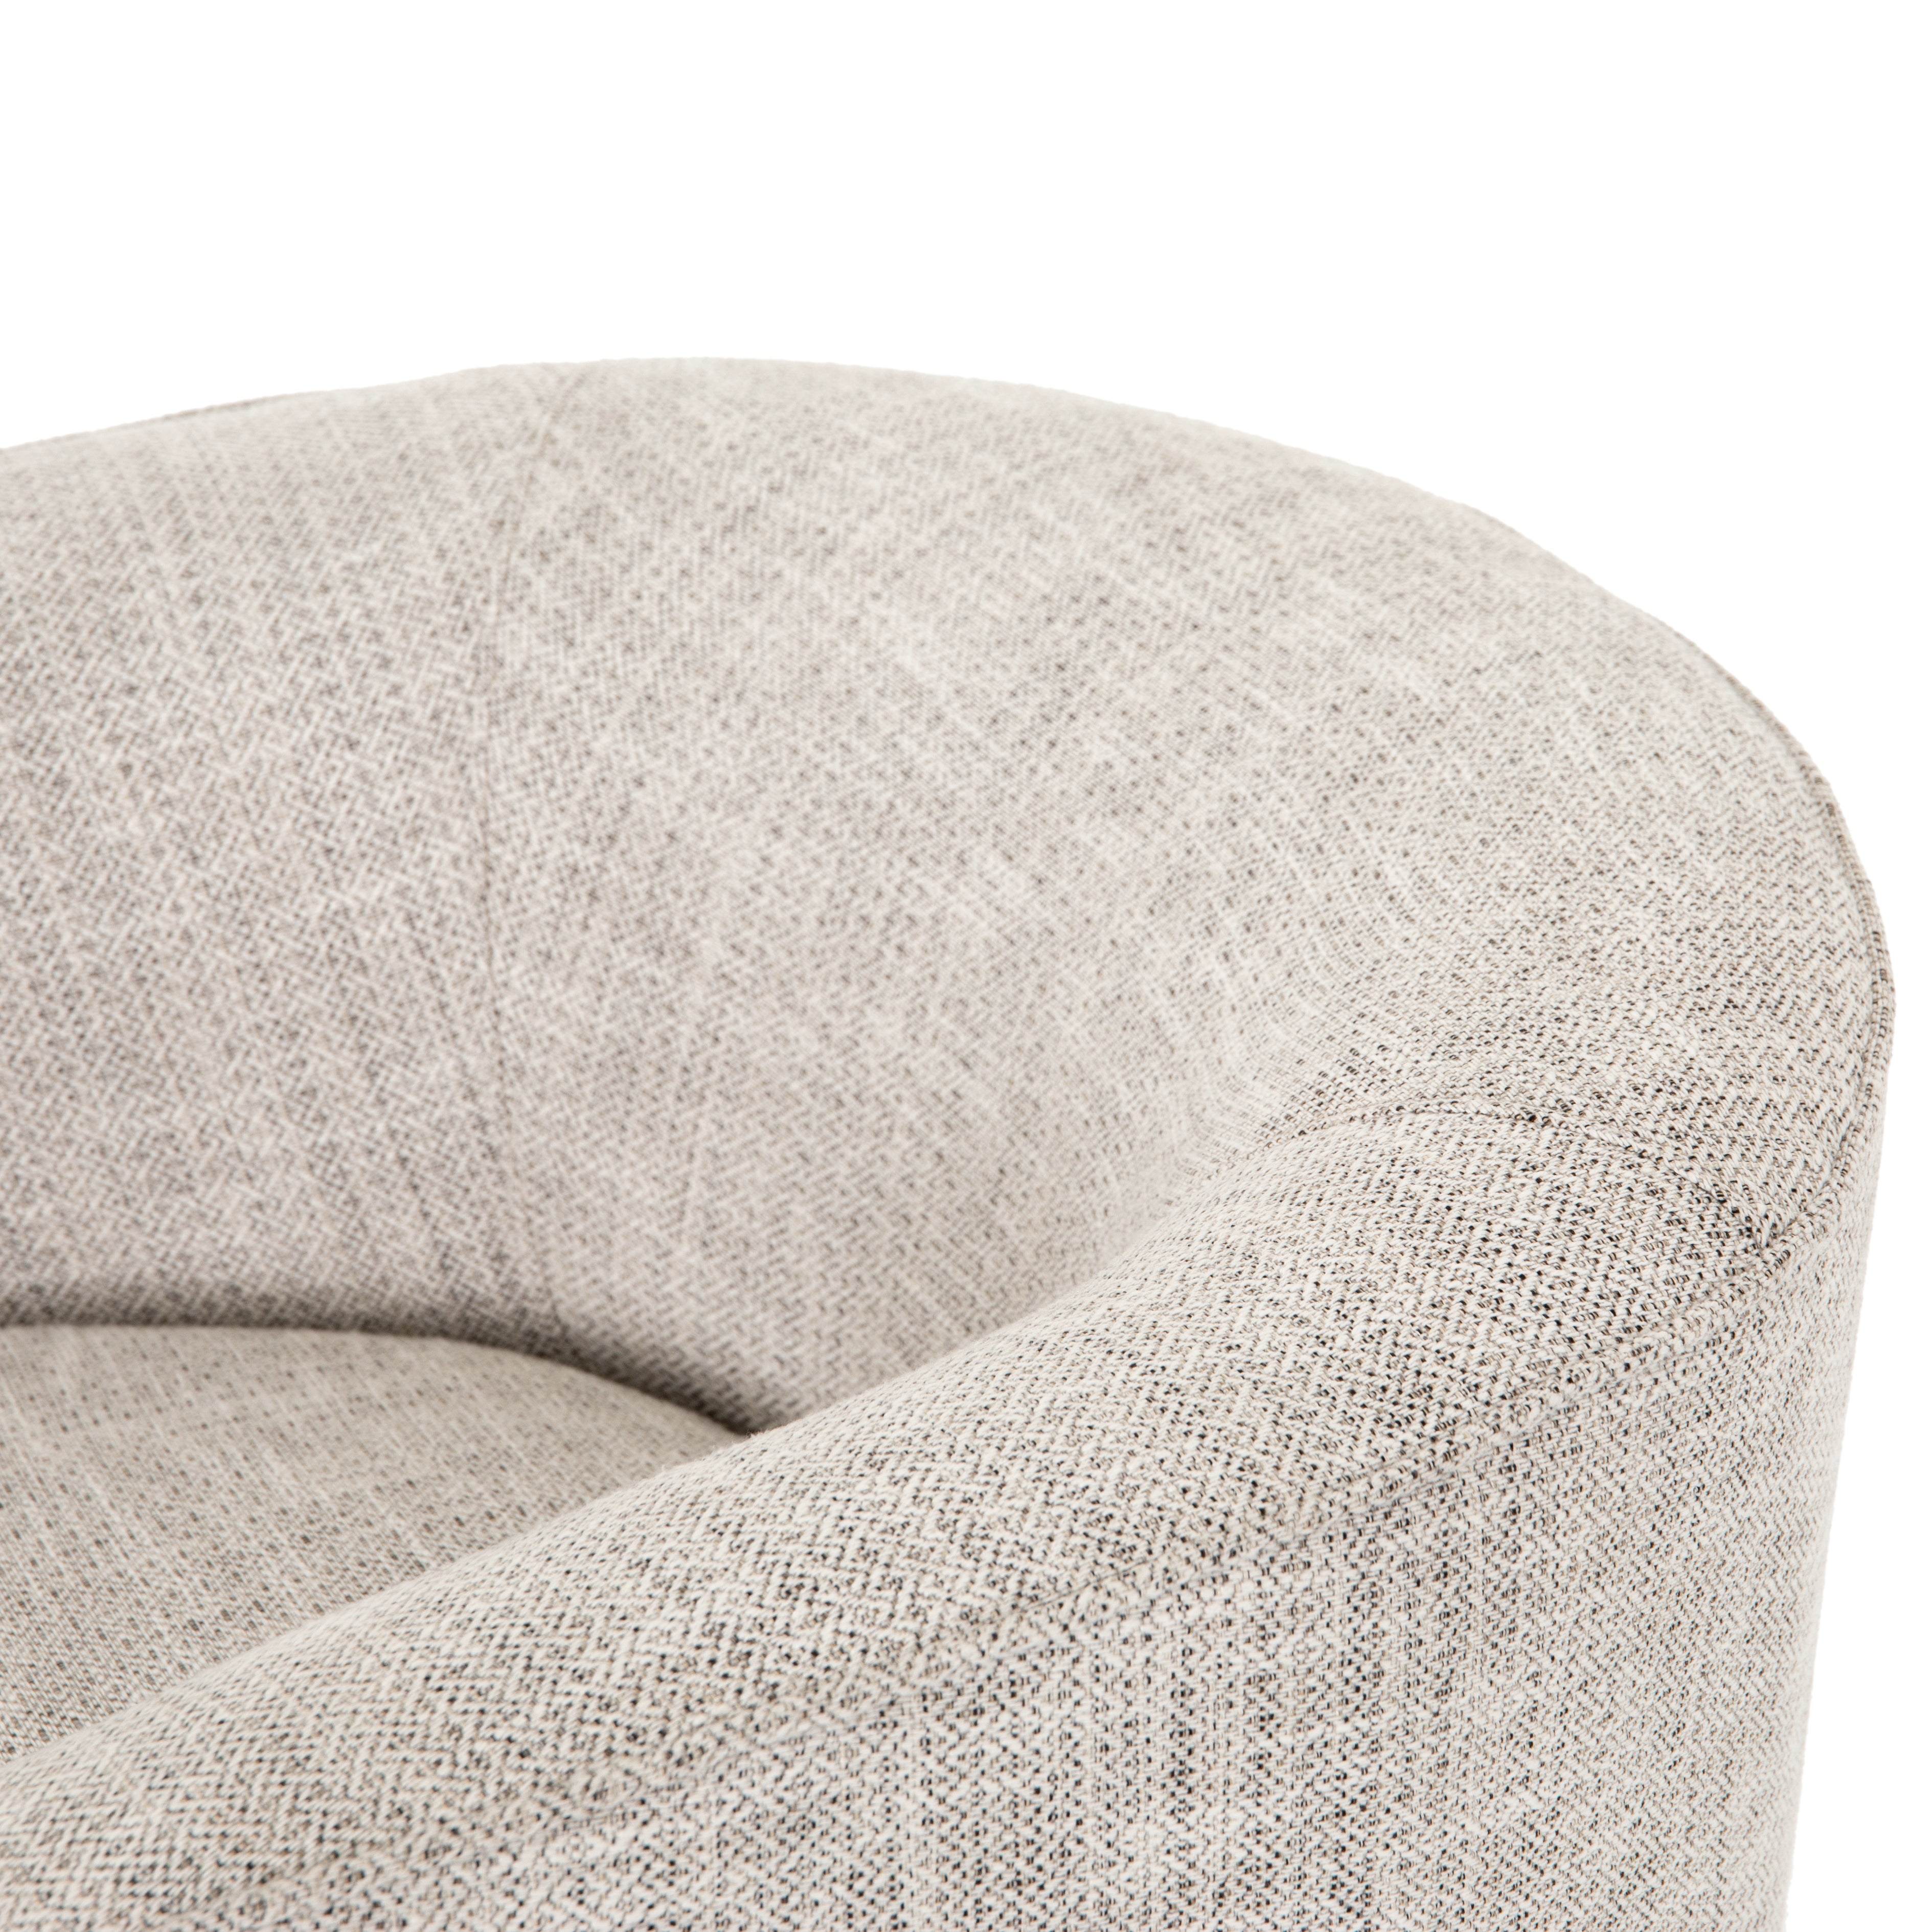 We love the curved, low back of this Mila Brazos Dove Swivel Chair. This adds a modern, functional seating to any living room, office, or other area.   Overall Dimensions: 35.00"w x 34.50"d x 27.00"h Seat Depth: 24" Seat Height: 16" Arm Height from Floor: 26" Arm Height from Seat: 9.5"